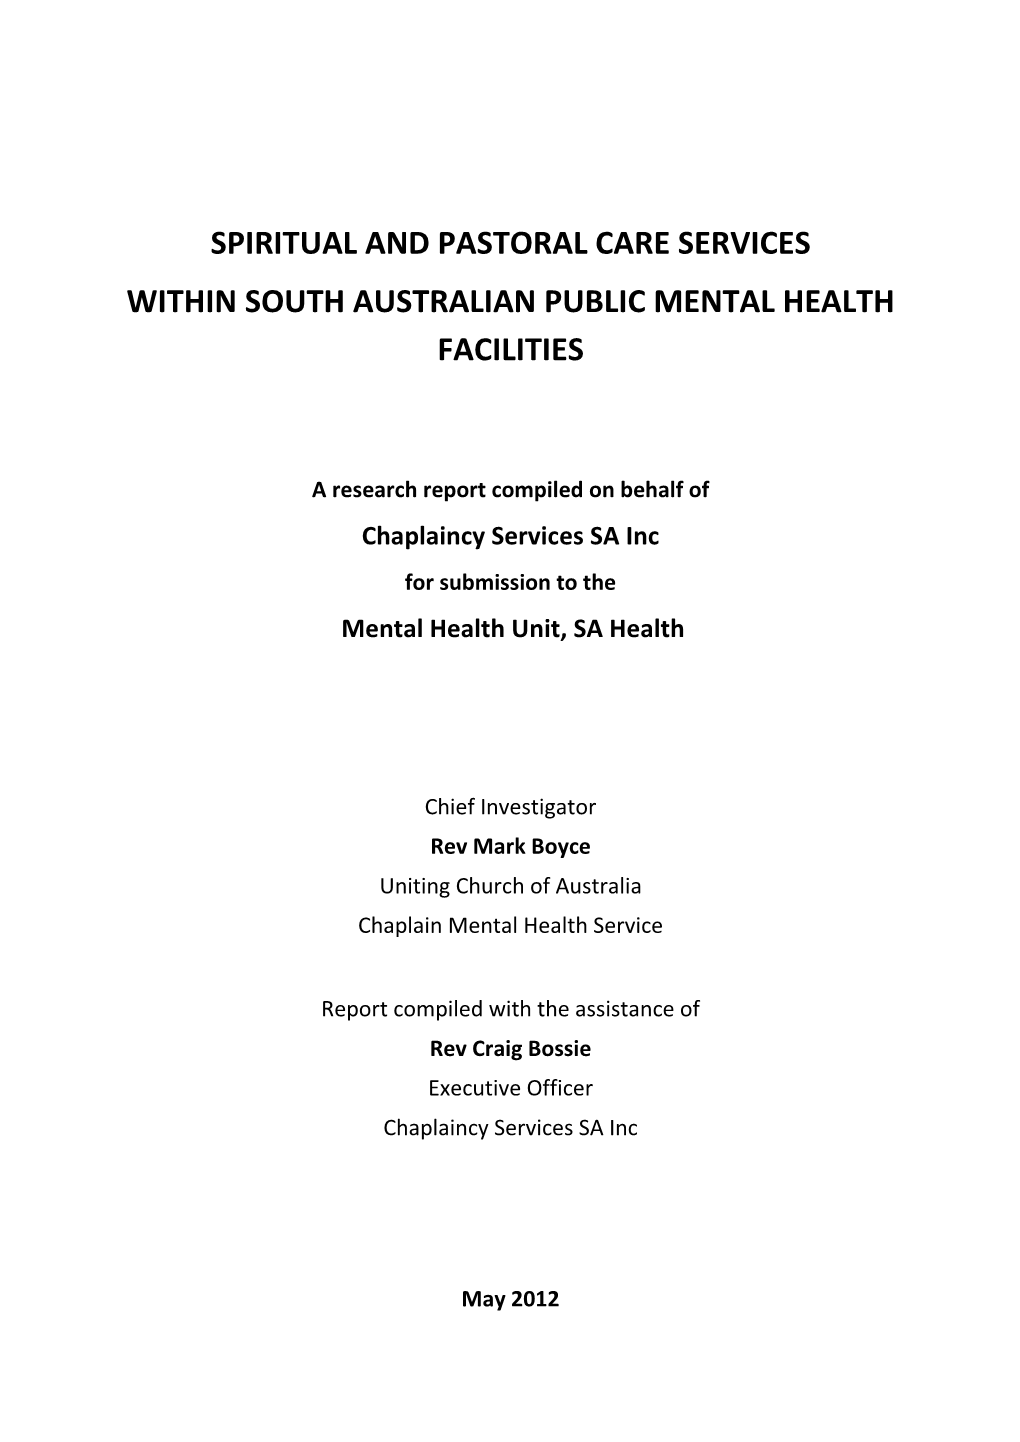 Spiritual and Pastoral Care Services Within South Australian Public Mental Health Facilities